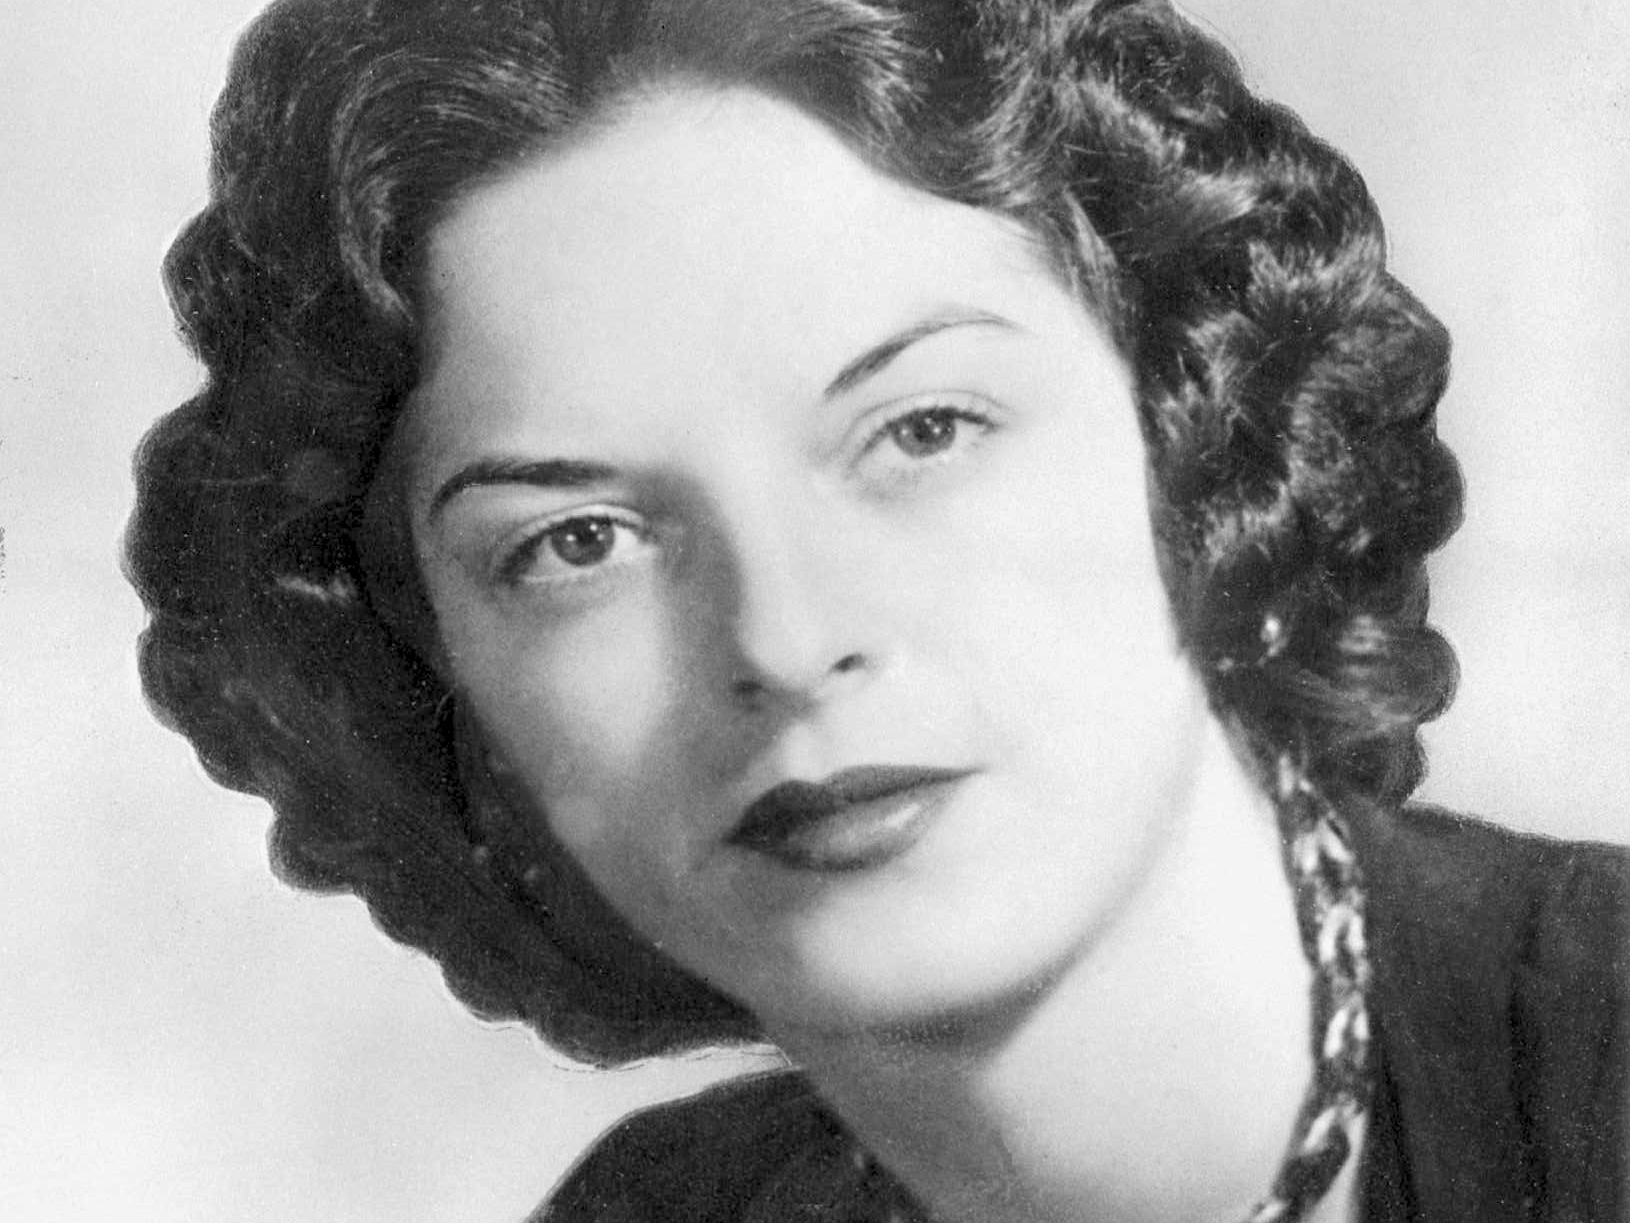 Most evil people still living in the world - carolyn bryant